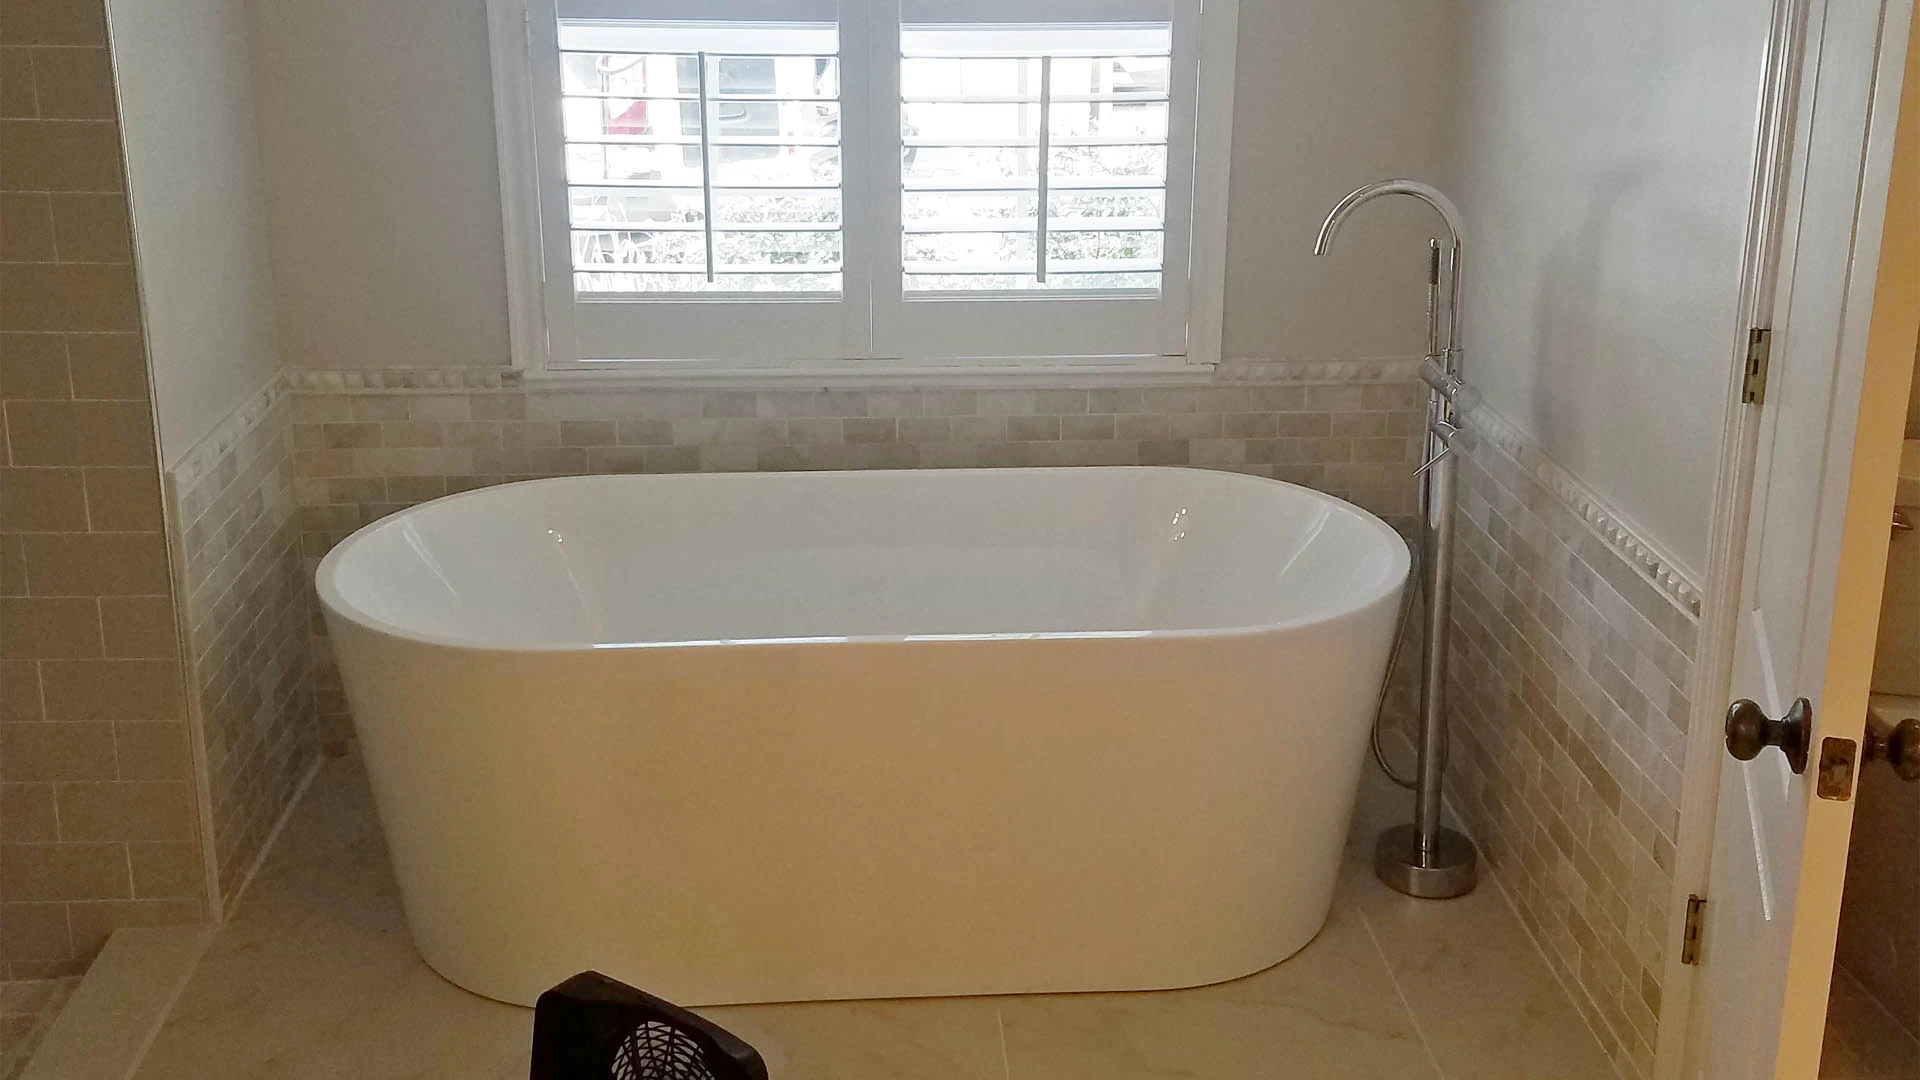 Residential tub and shower install in the Riverview, FL.